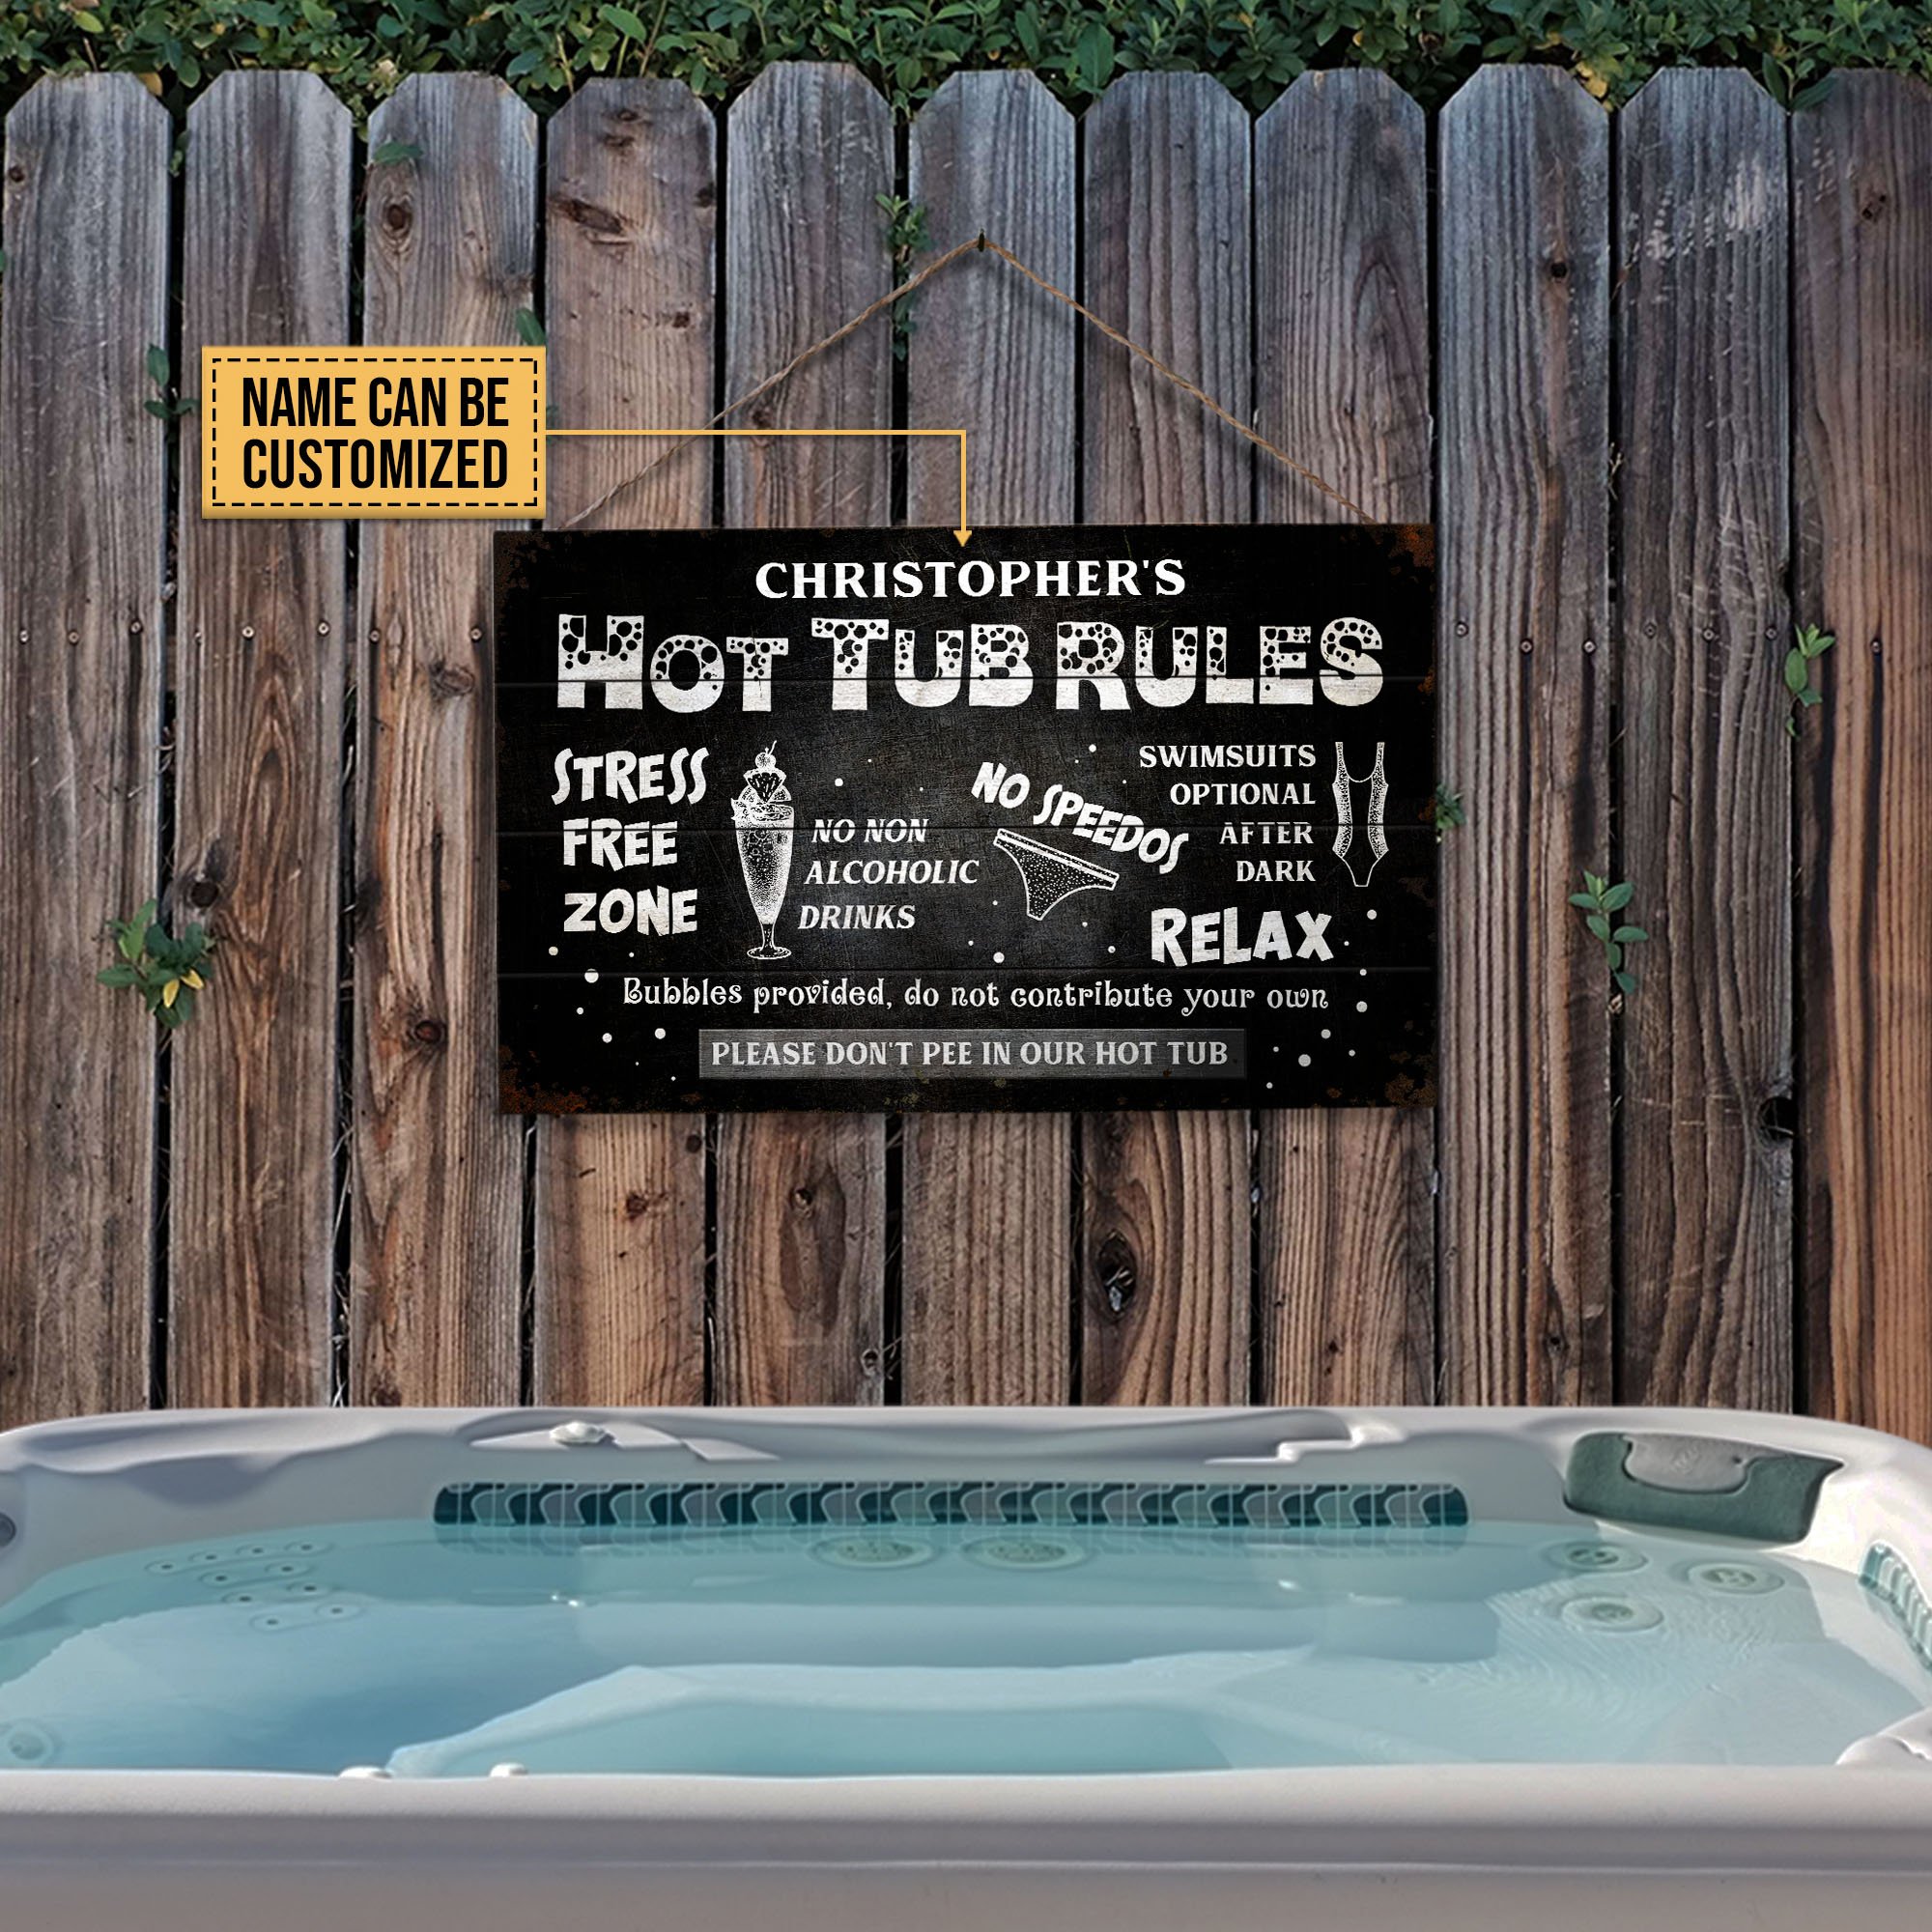 Personalized Hot Tub Rules Stress Free Zone Customized Wood Rectangle Sign